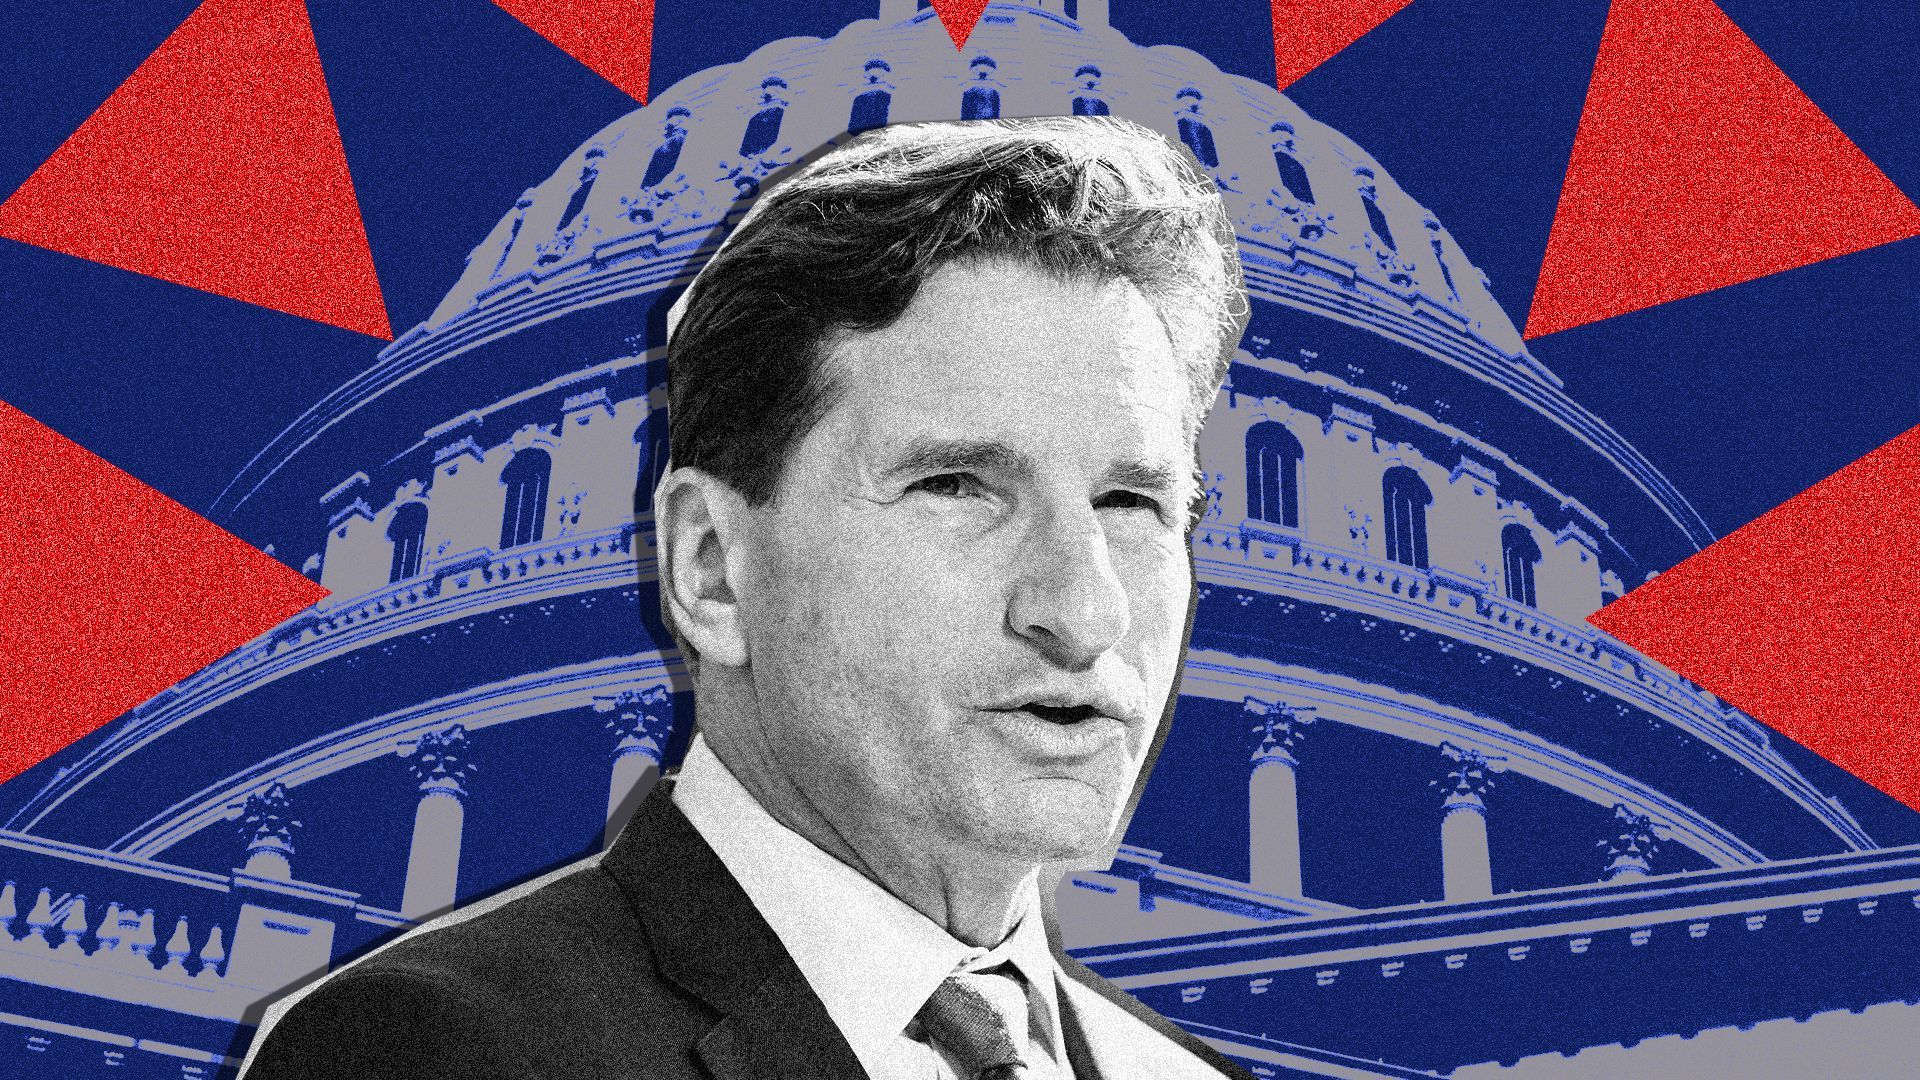 Dean Phillips' once strong standing on Capitol Hill has all but collapsed